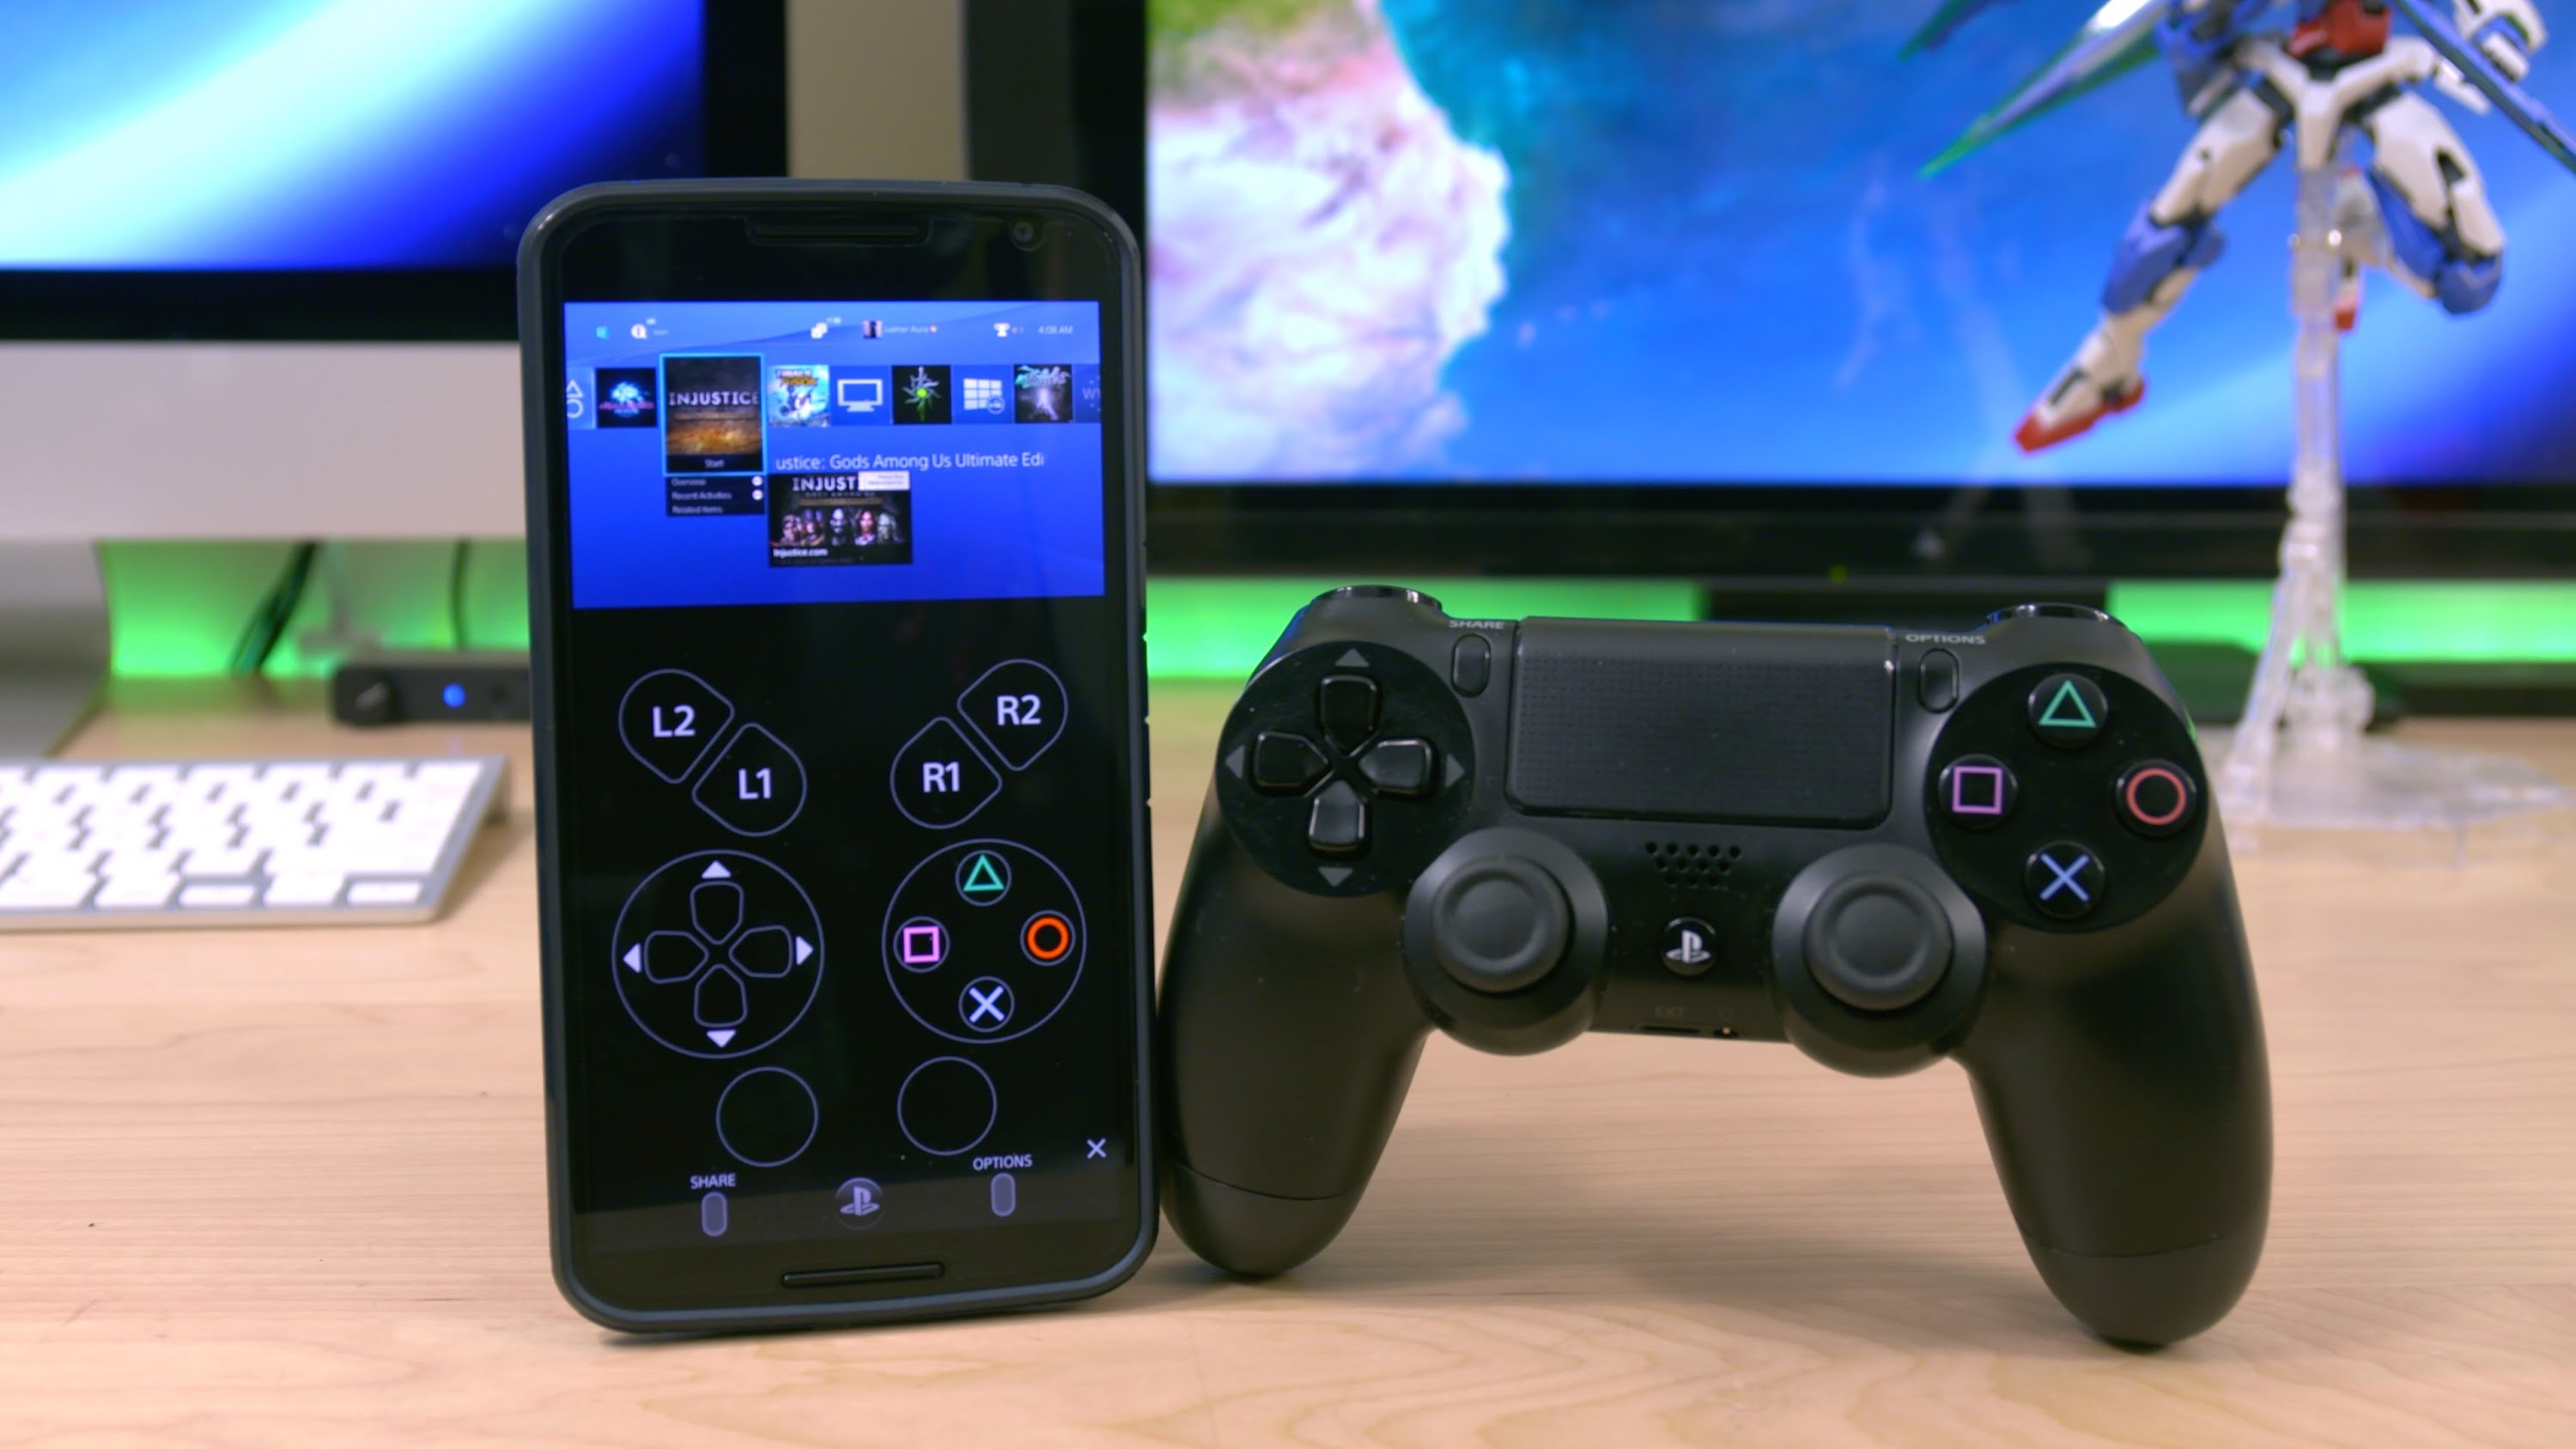 Ps4 игры андроид. Sony ps5 Remote. Ps5 Remote Play Android TV. Ps4 Play. Ремоут плей пс5.